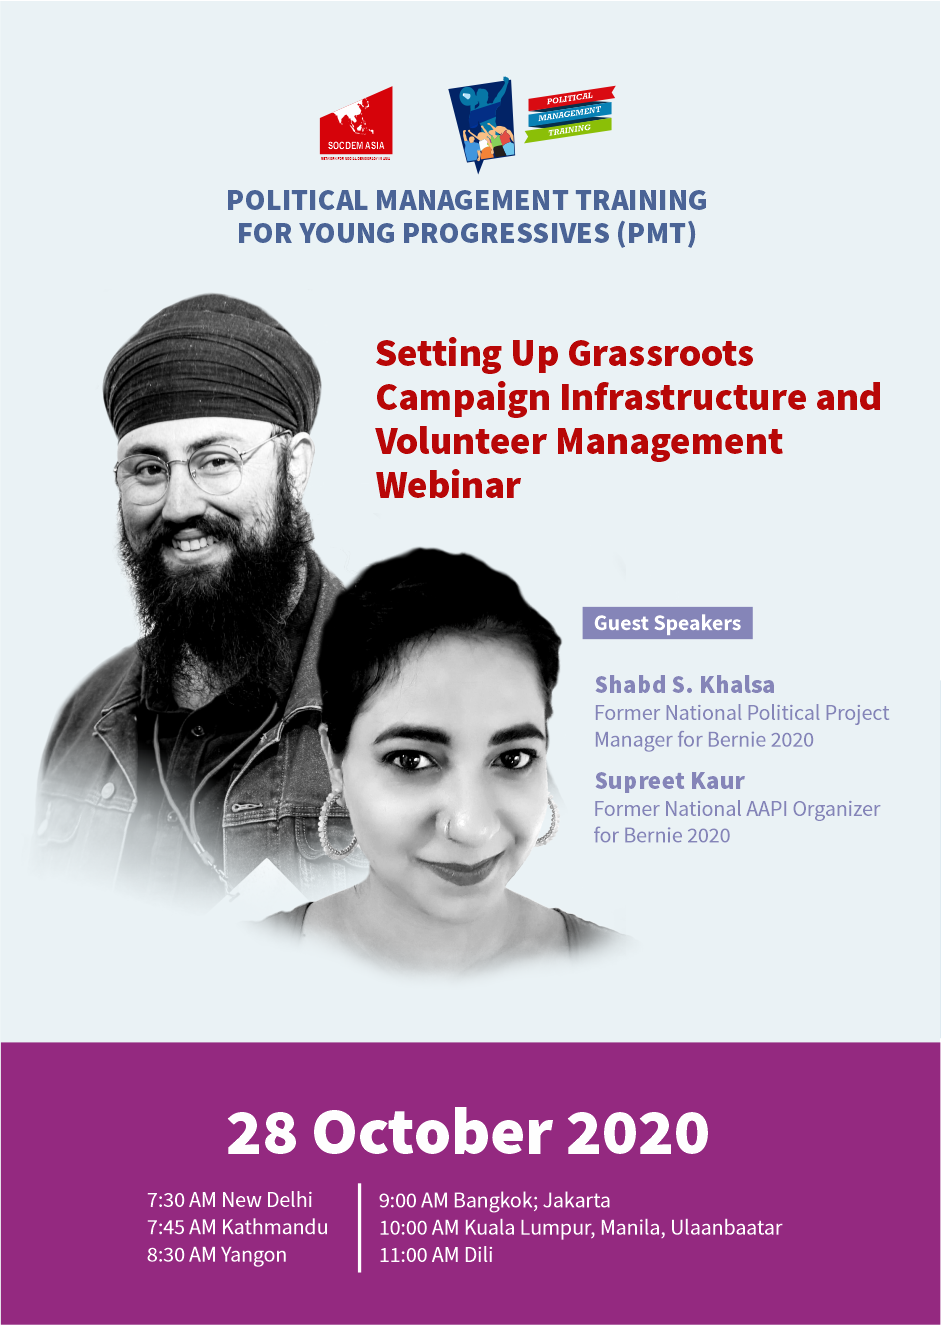 Setting Up Grassroots Campaign Infrastructure and Volunteer Management Webinar